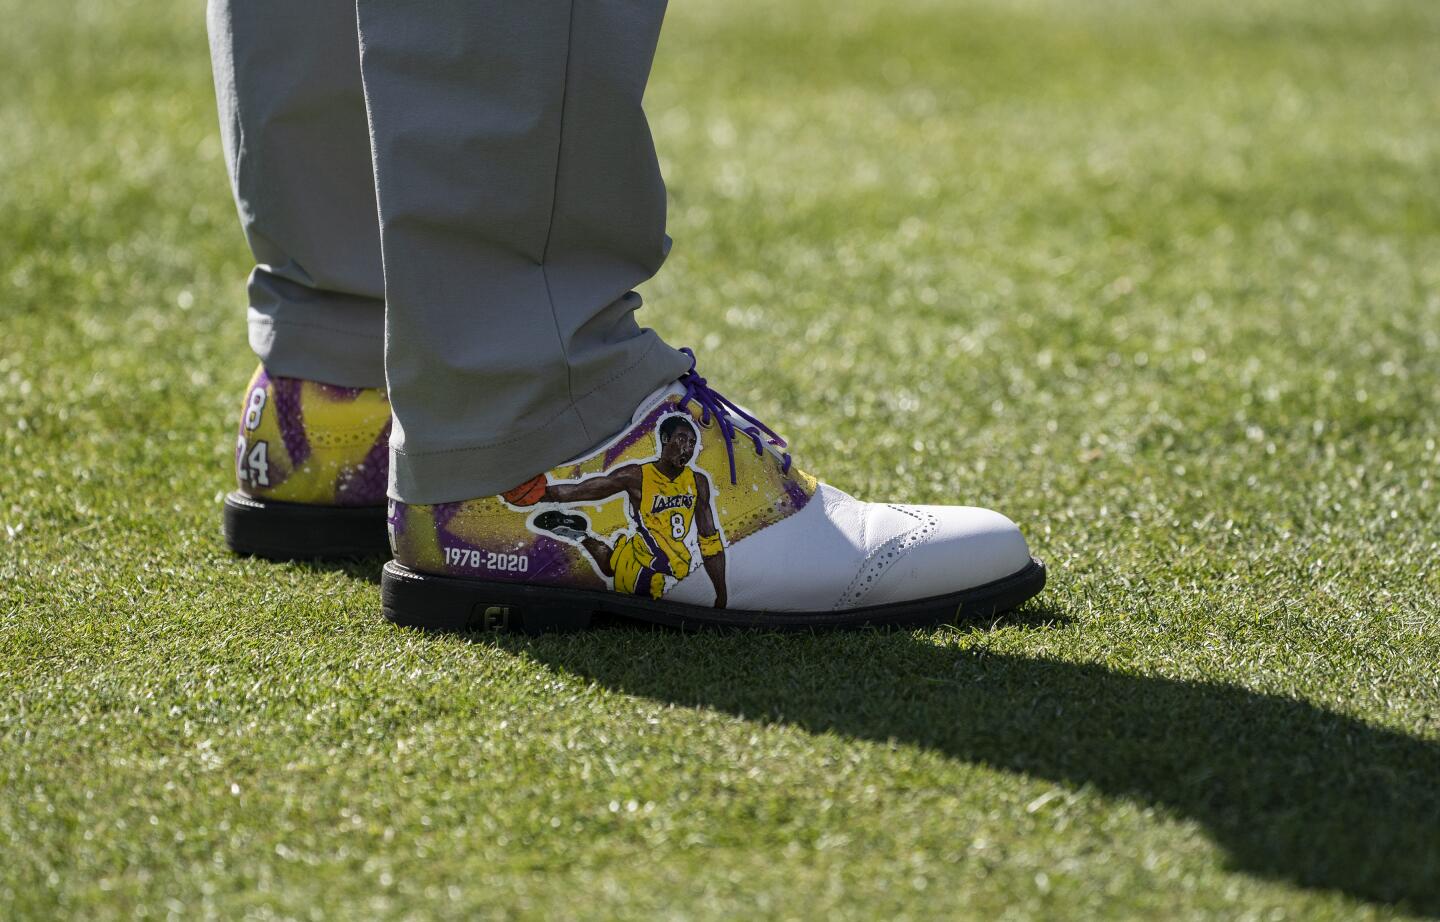 Justin Thomas pays tribute to the life of Lakers legend Kobe Bryant with customized golf shoes during the first round of the Genesis Invitational at Riviera Country Club on Feb. 13, 2020.